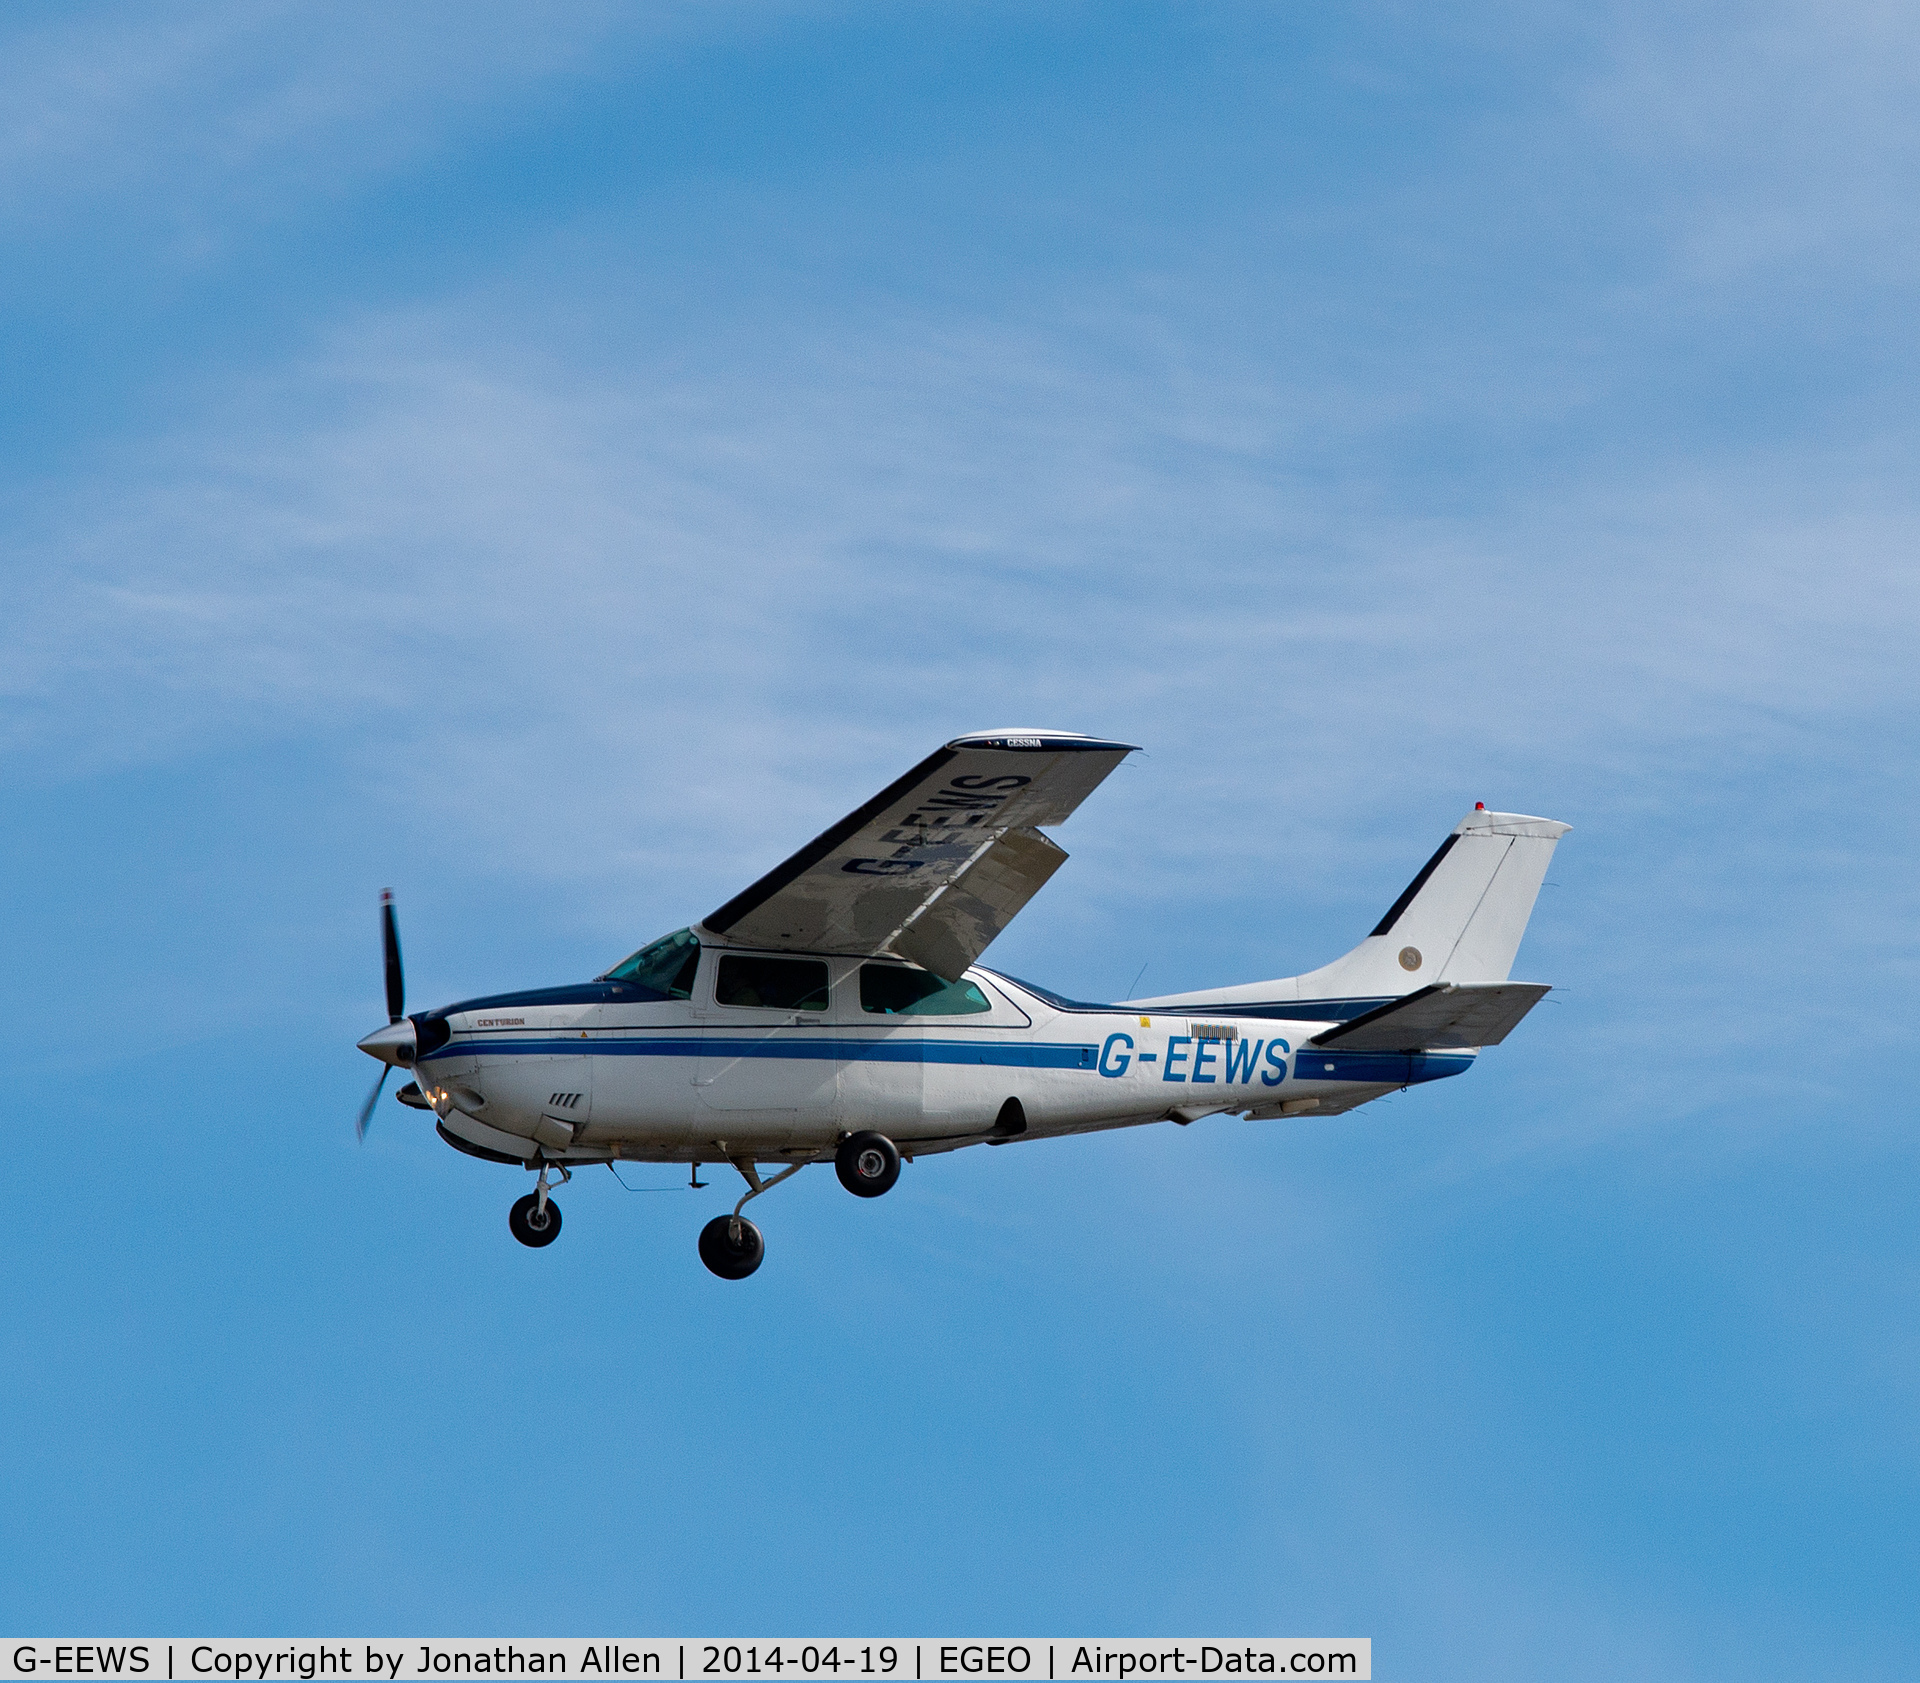 G-EEWS, 1981 Cessna T210N Turbo Centurion C/N 210-64341, About to land at Oban Airport.